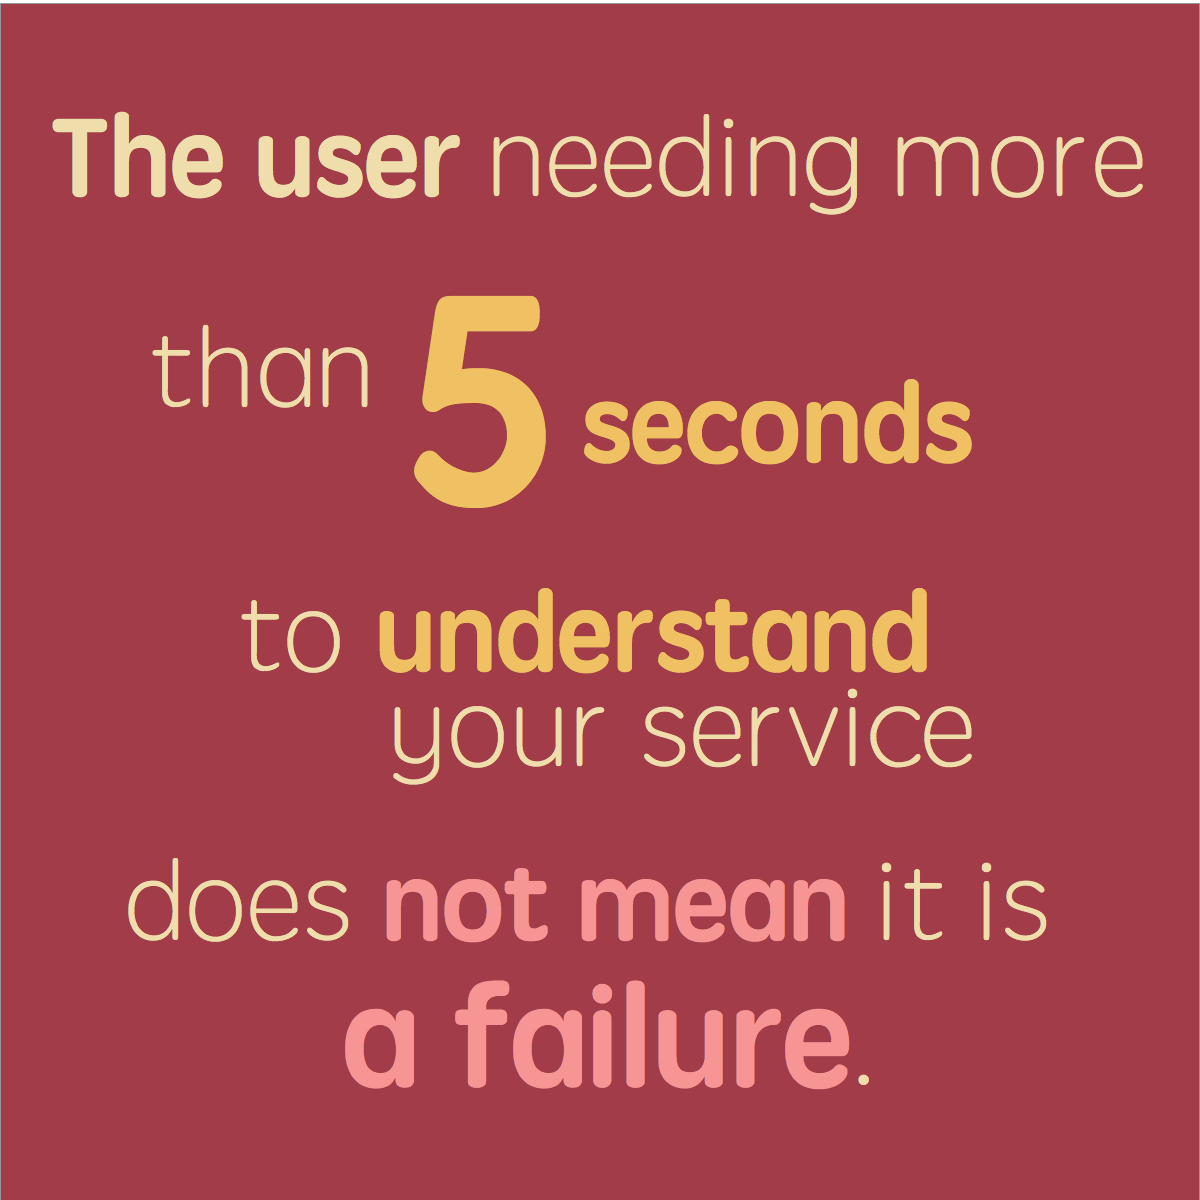 The user needing more than 5 seconds to understand your service does not mean it is a failure.